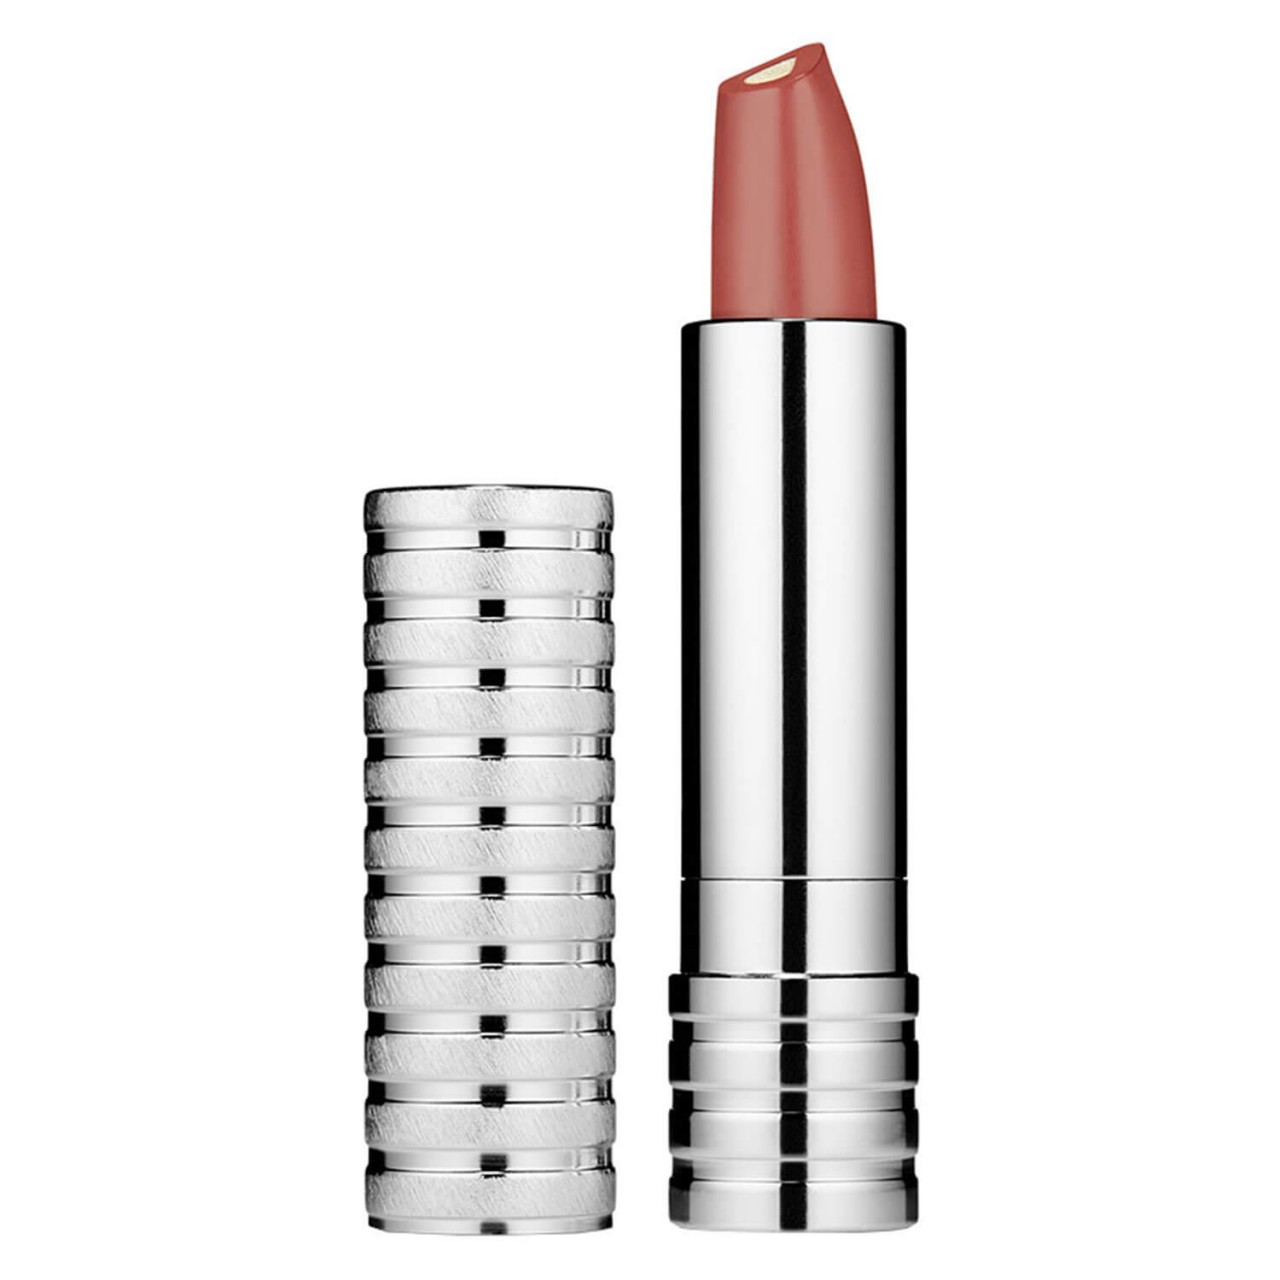 Clinique - Dramatically Different™ Lipstick Shaping Lip Colour - 07 Blushing Blush